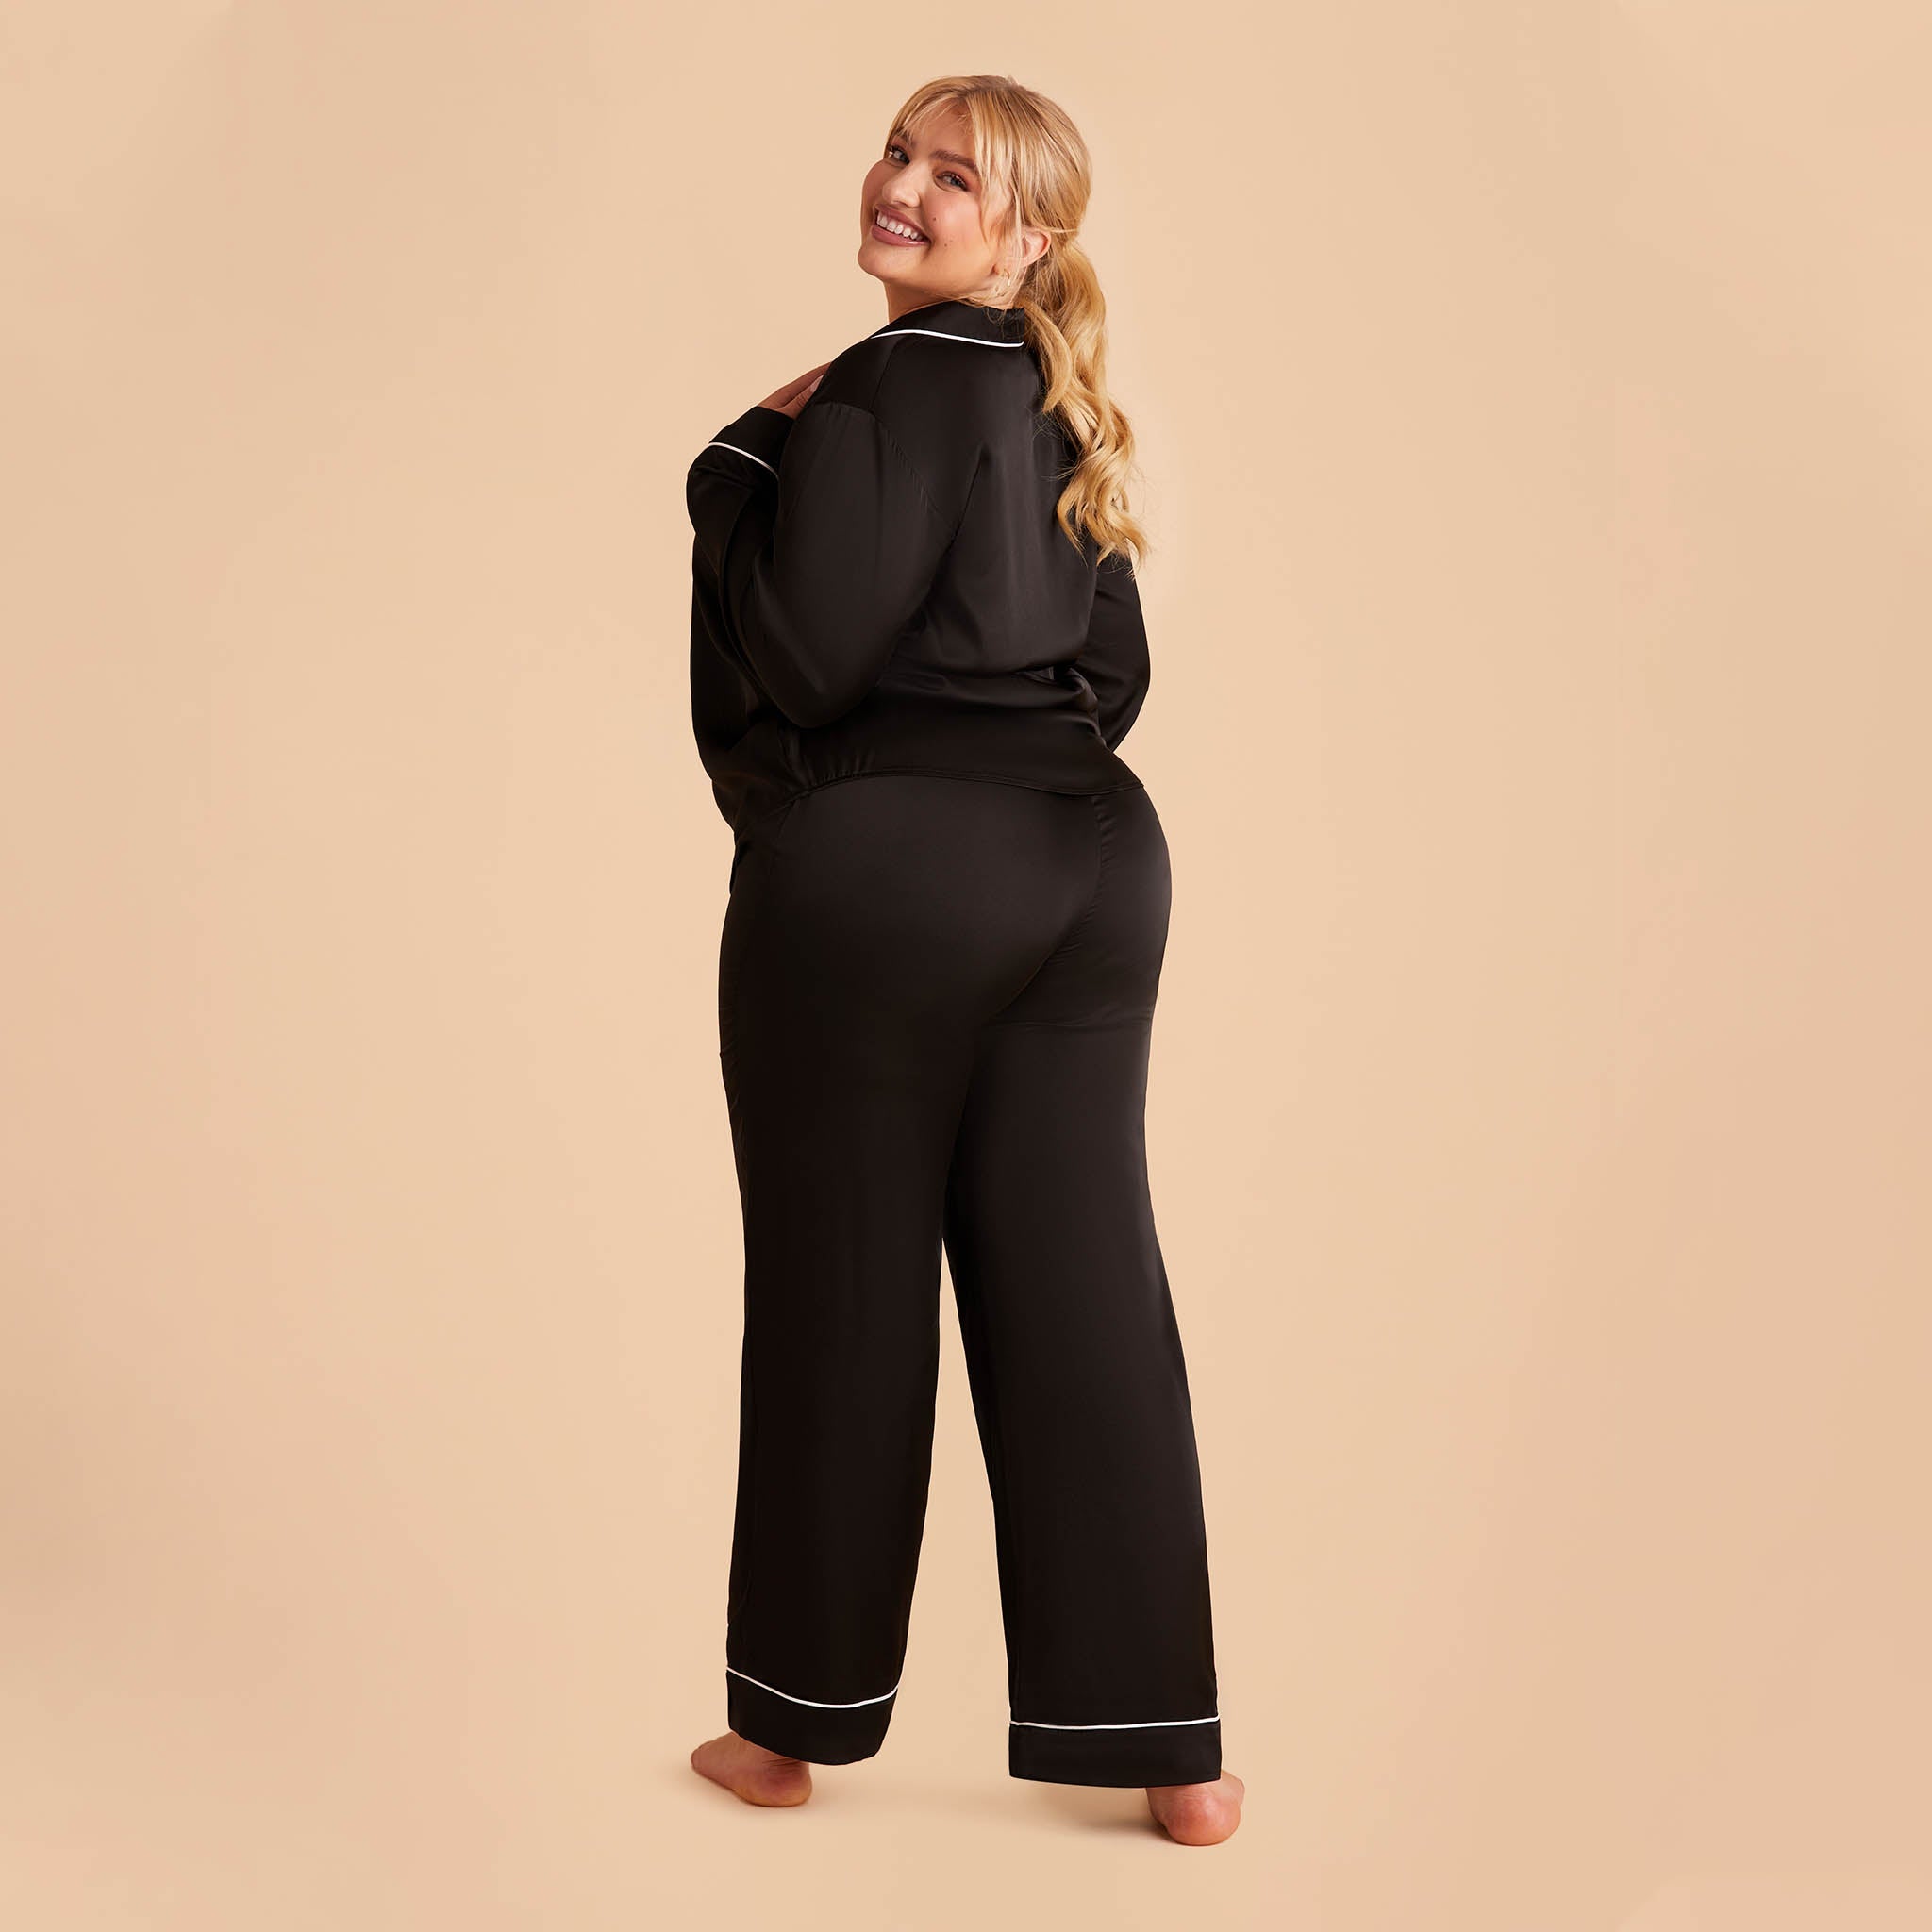 Jonny Plus Size Satin Long Sleeve Pajama Top With White Piping in black, back view